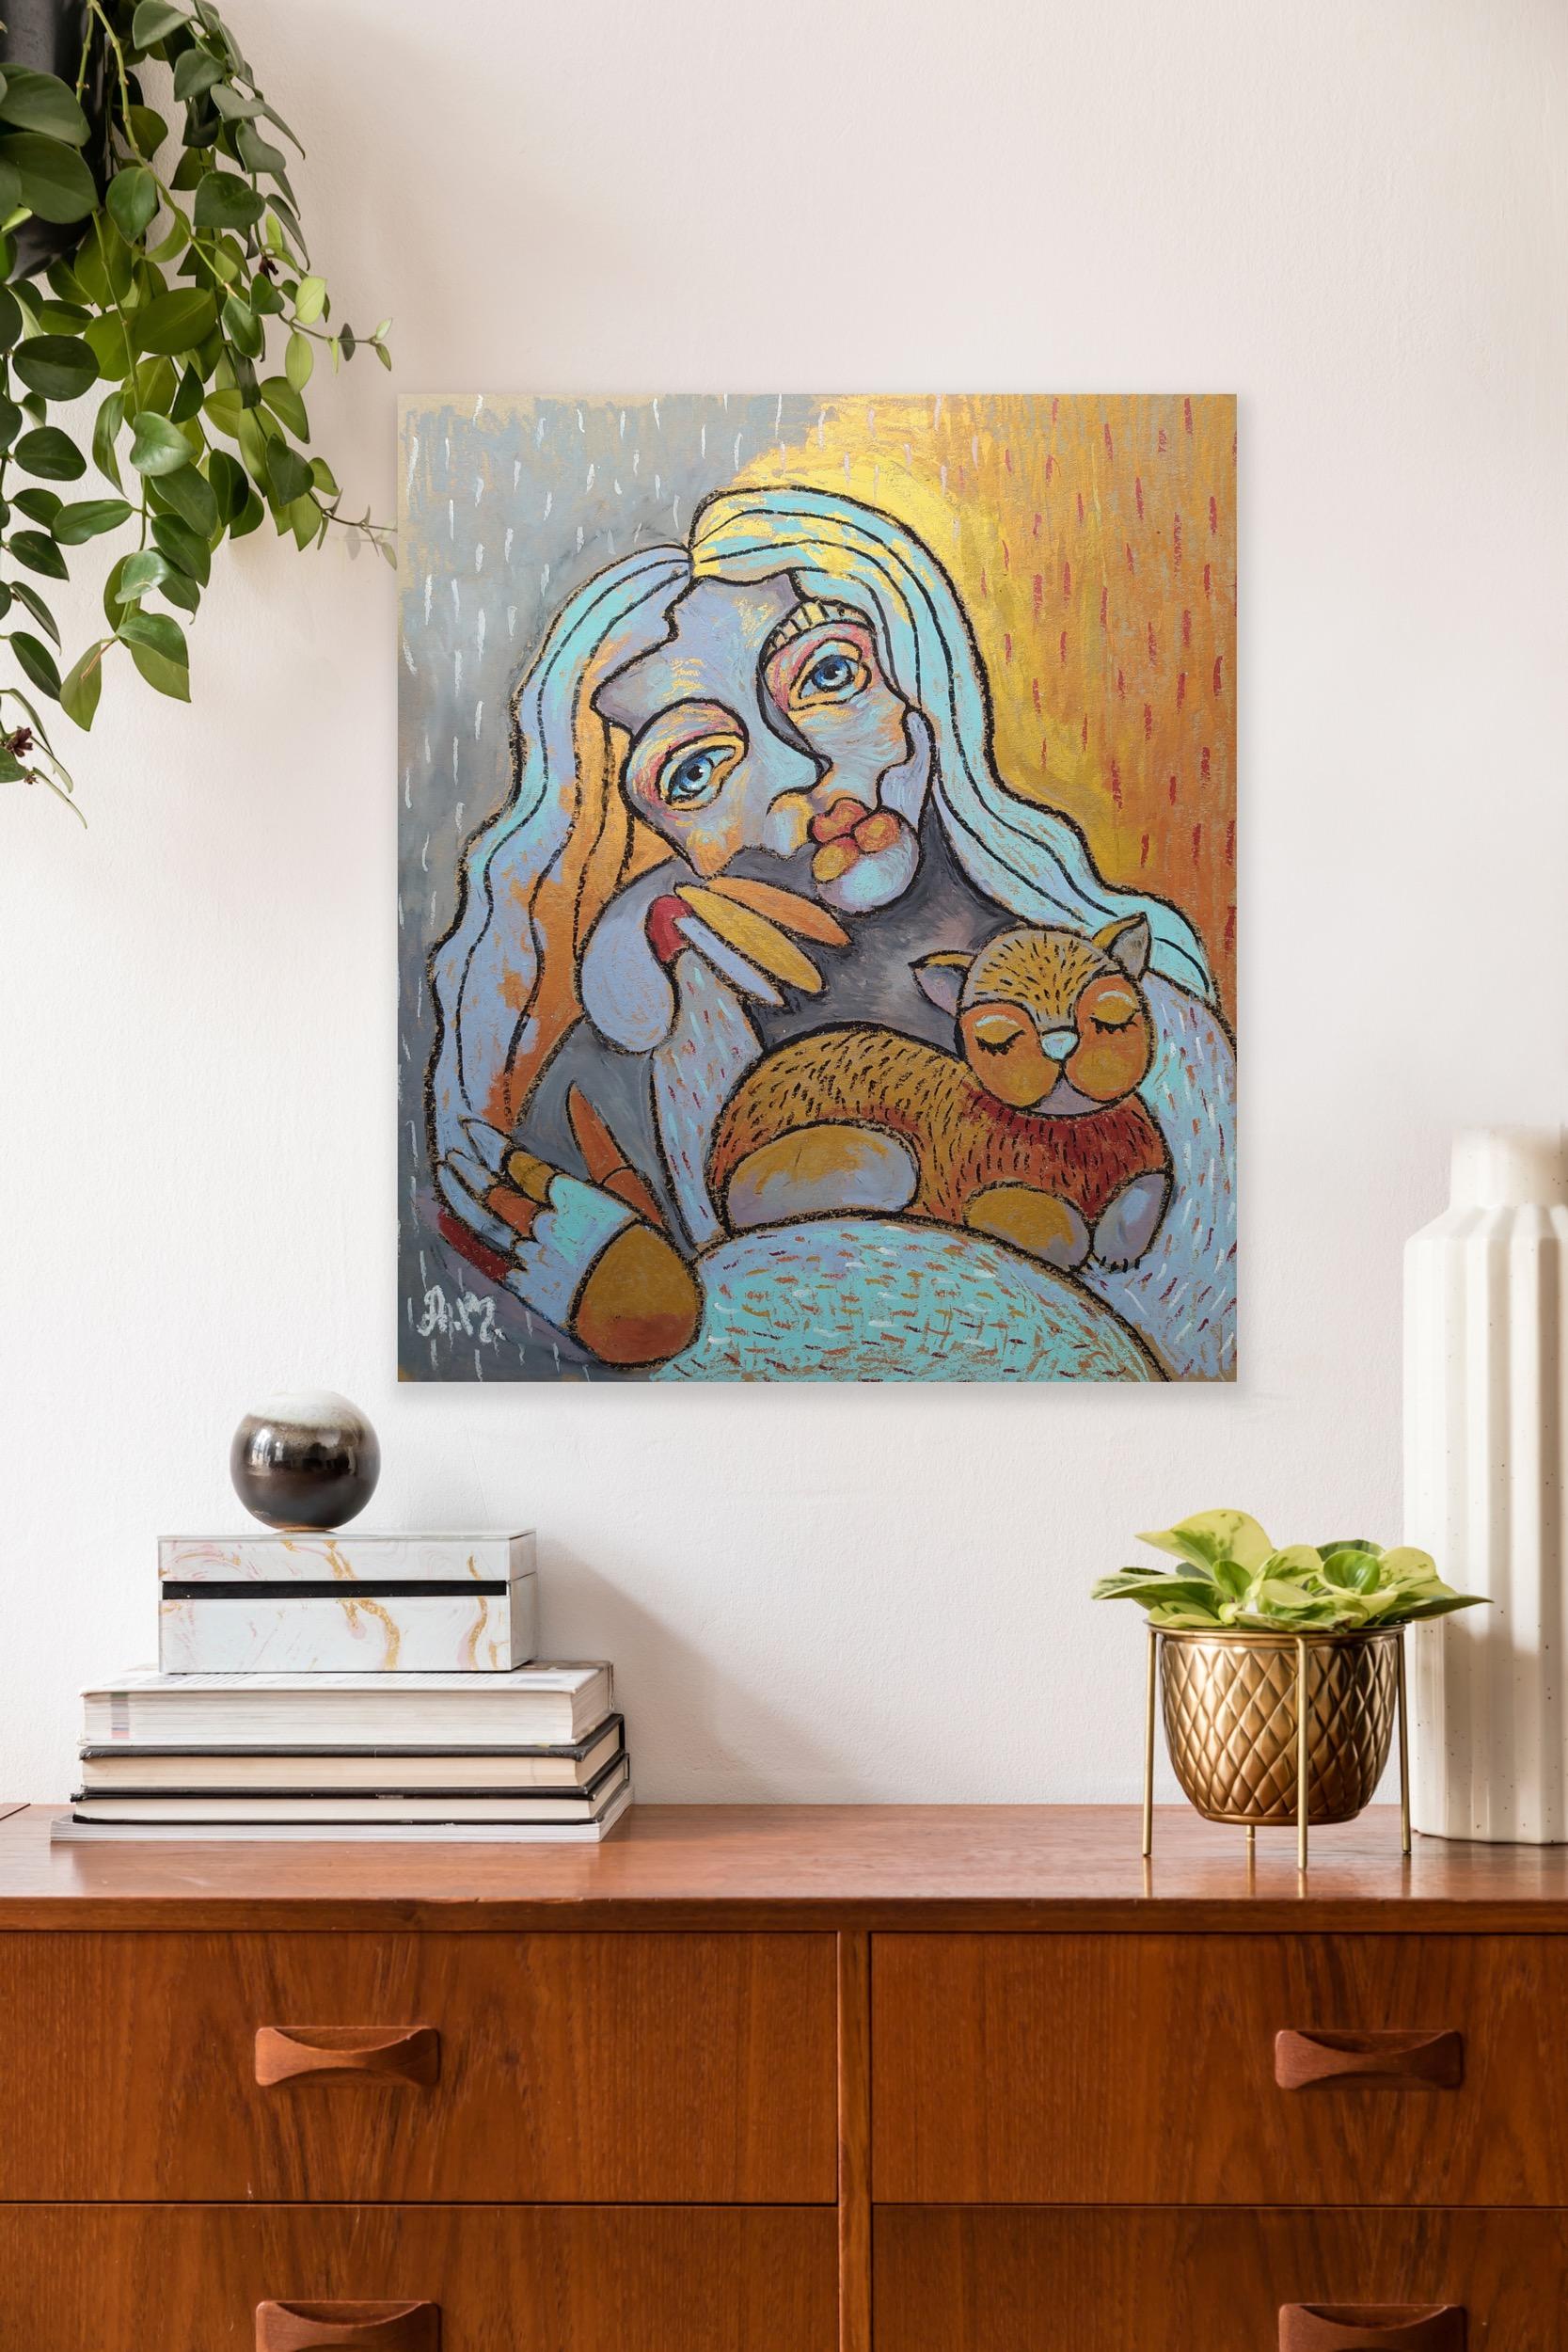 Girl with a cat
50x40 cm